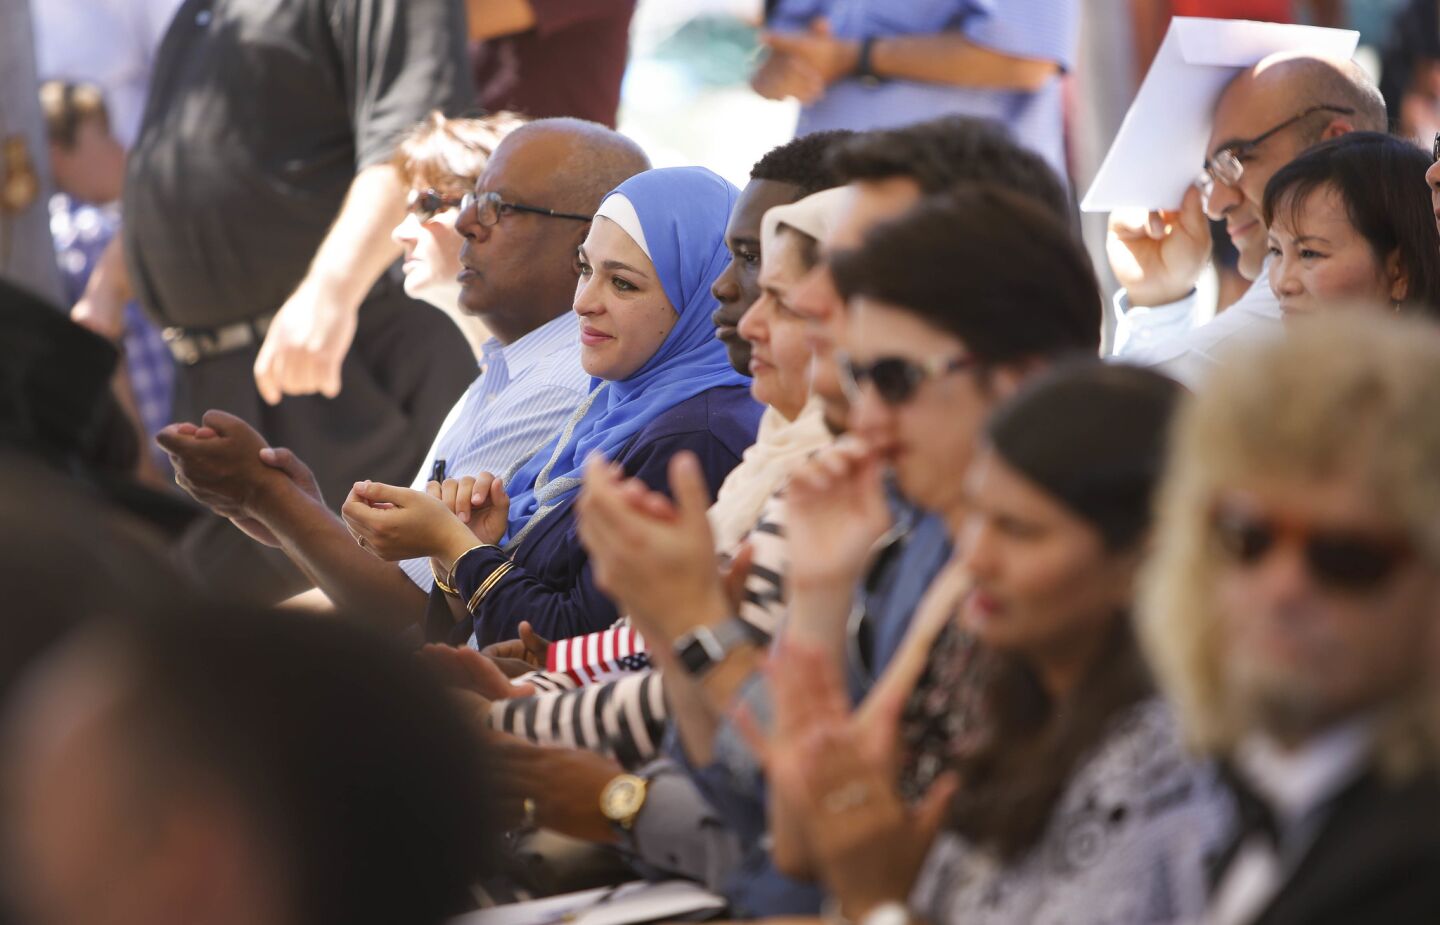 Duaa Saeed, second from left, originally from Jordan, was one of about 100 people from about 54 countries who took the Oath of Allegiance to the United States of America and became U.S. citizens in a naturalization ceremony held in Centennial Plaza near El Cajon City Hall to kickoff El Cajon's, America on Main Street festivities.